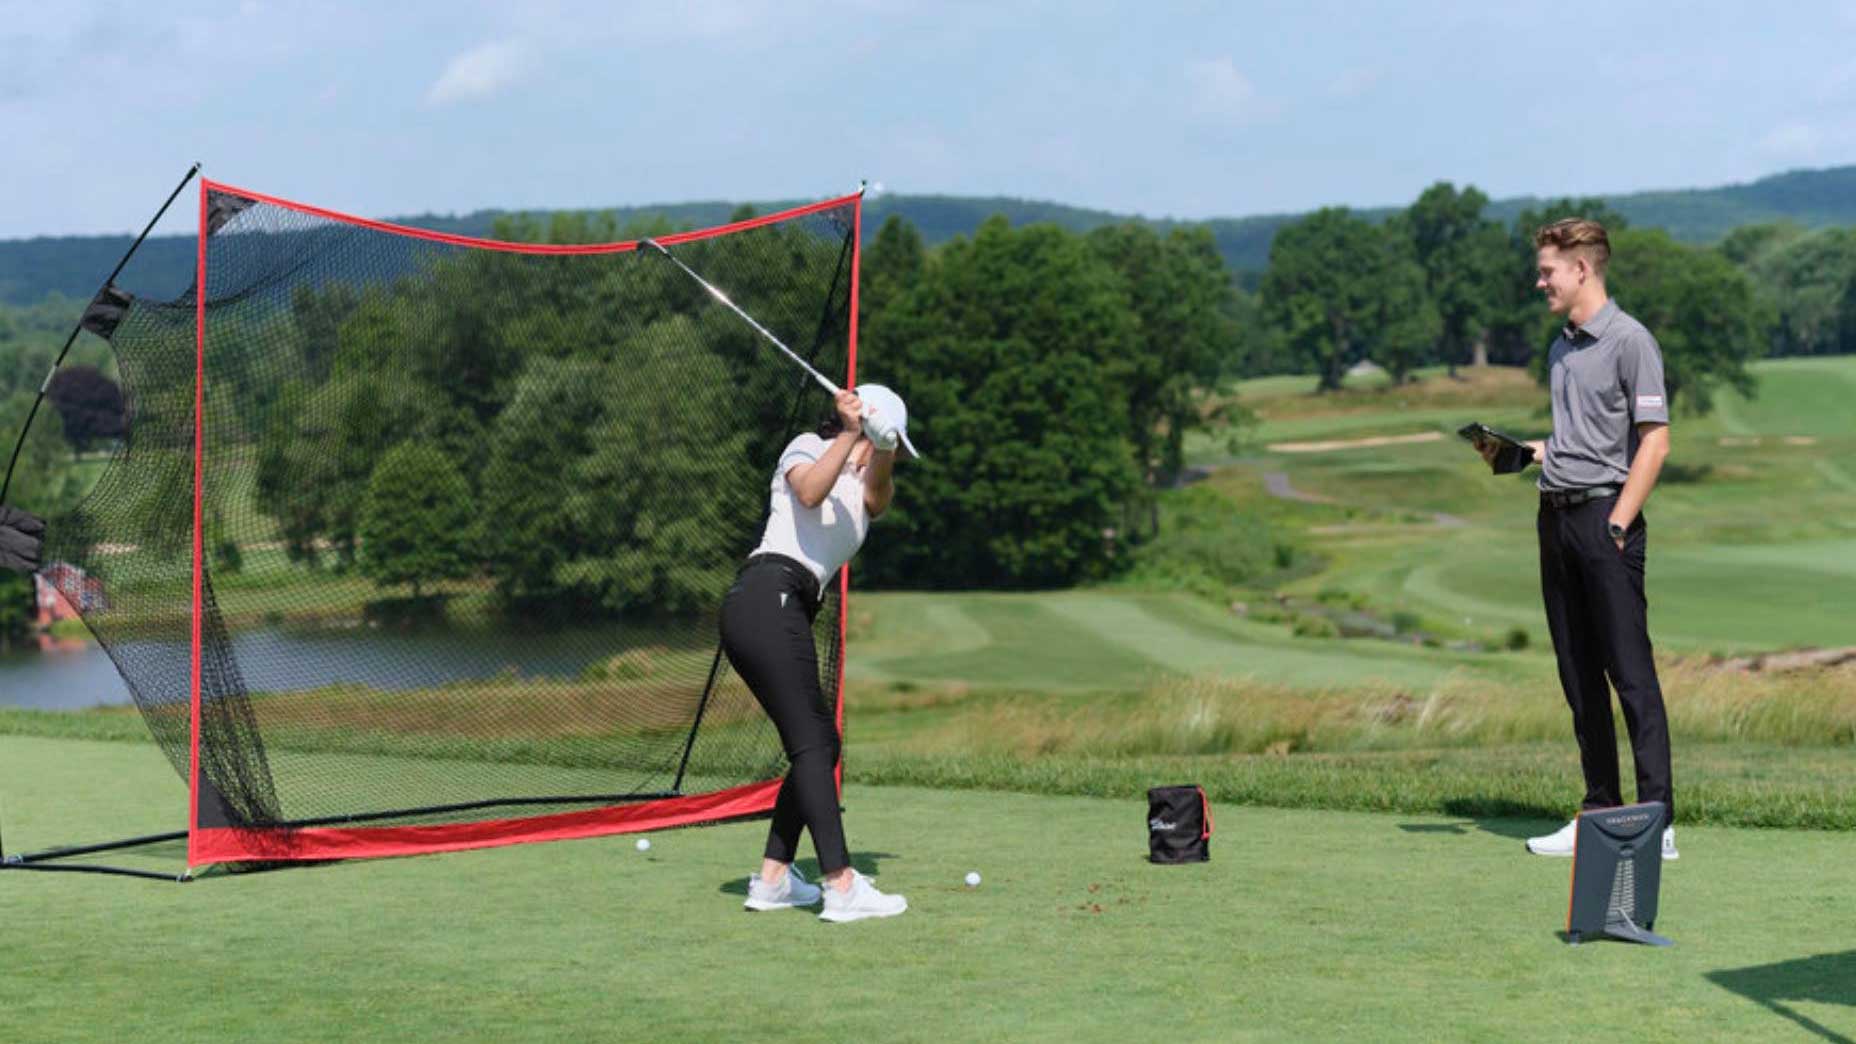 Golfer practices hitting into golf net with instructor watching